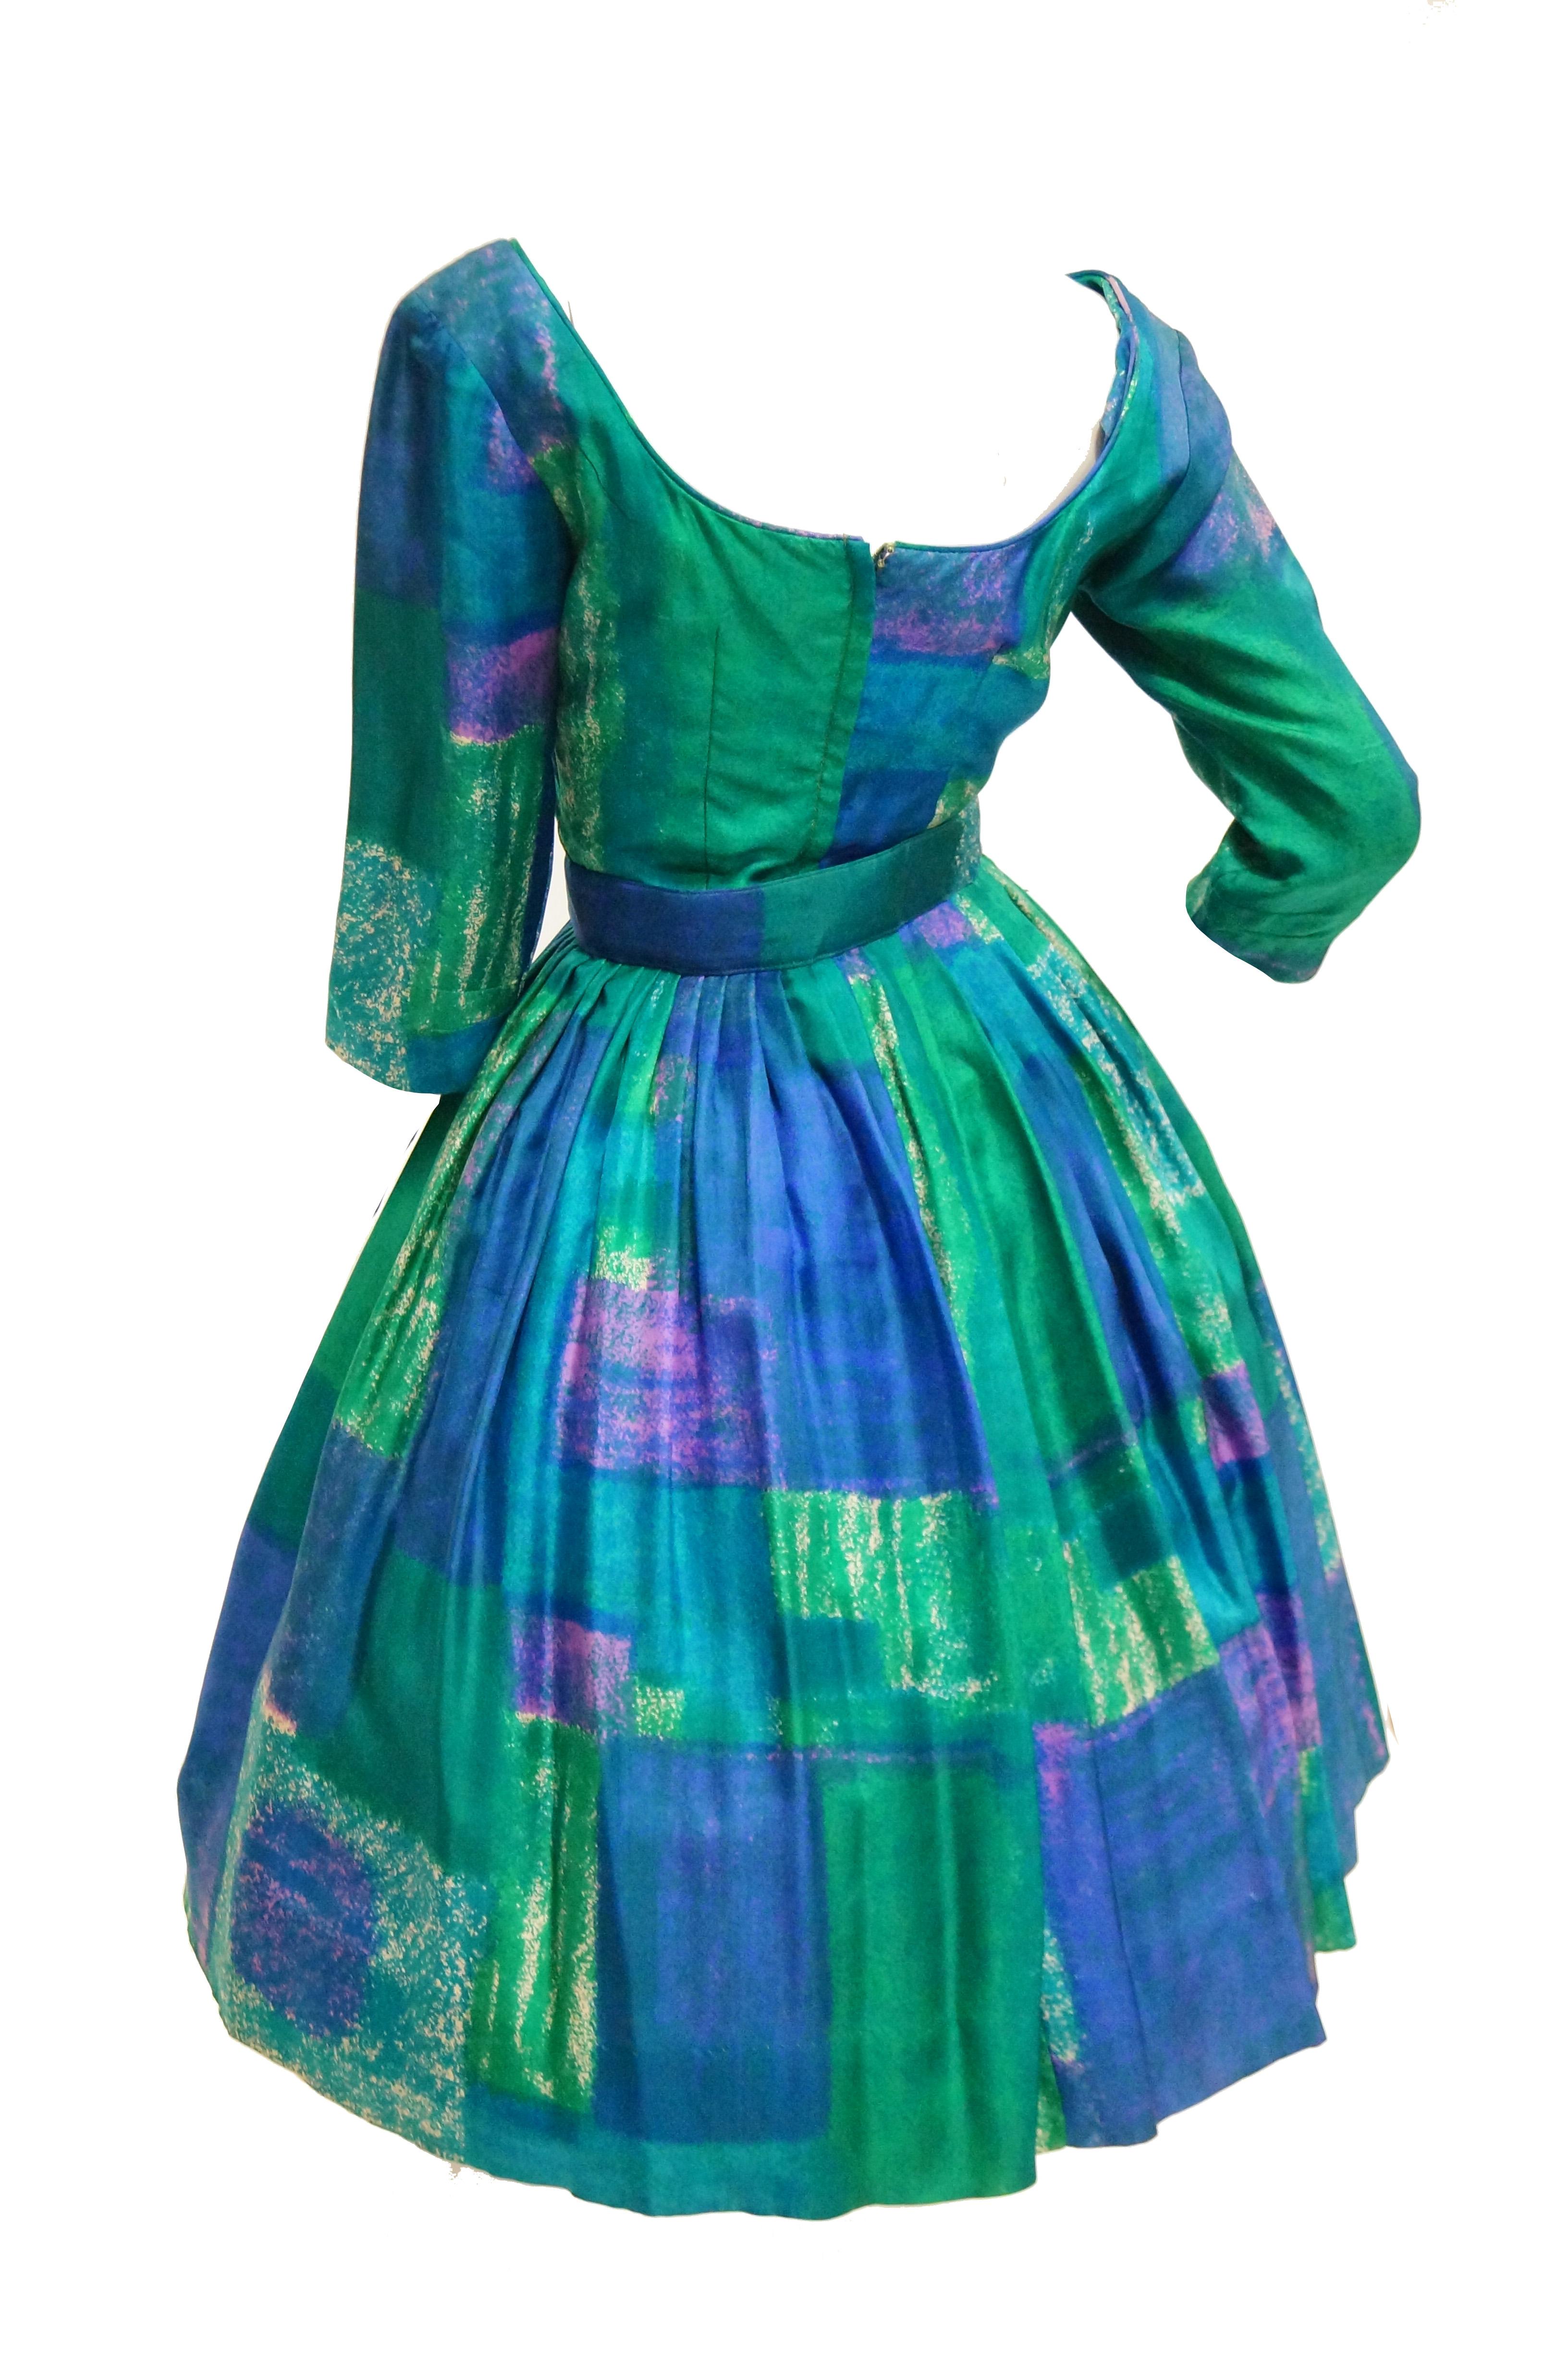 1950s Suzy Perette Blue and Green Geometric Watercolor New Look Cocktail Dress In Excellent Condition For Sale In Houston, TX